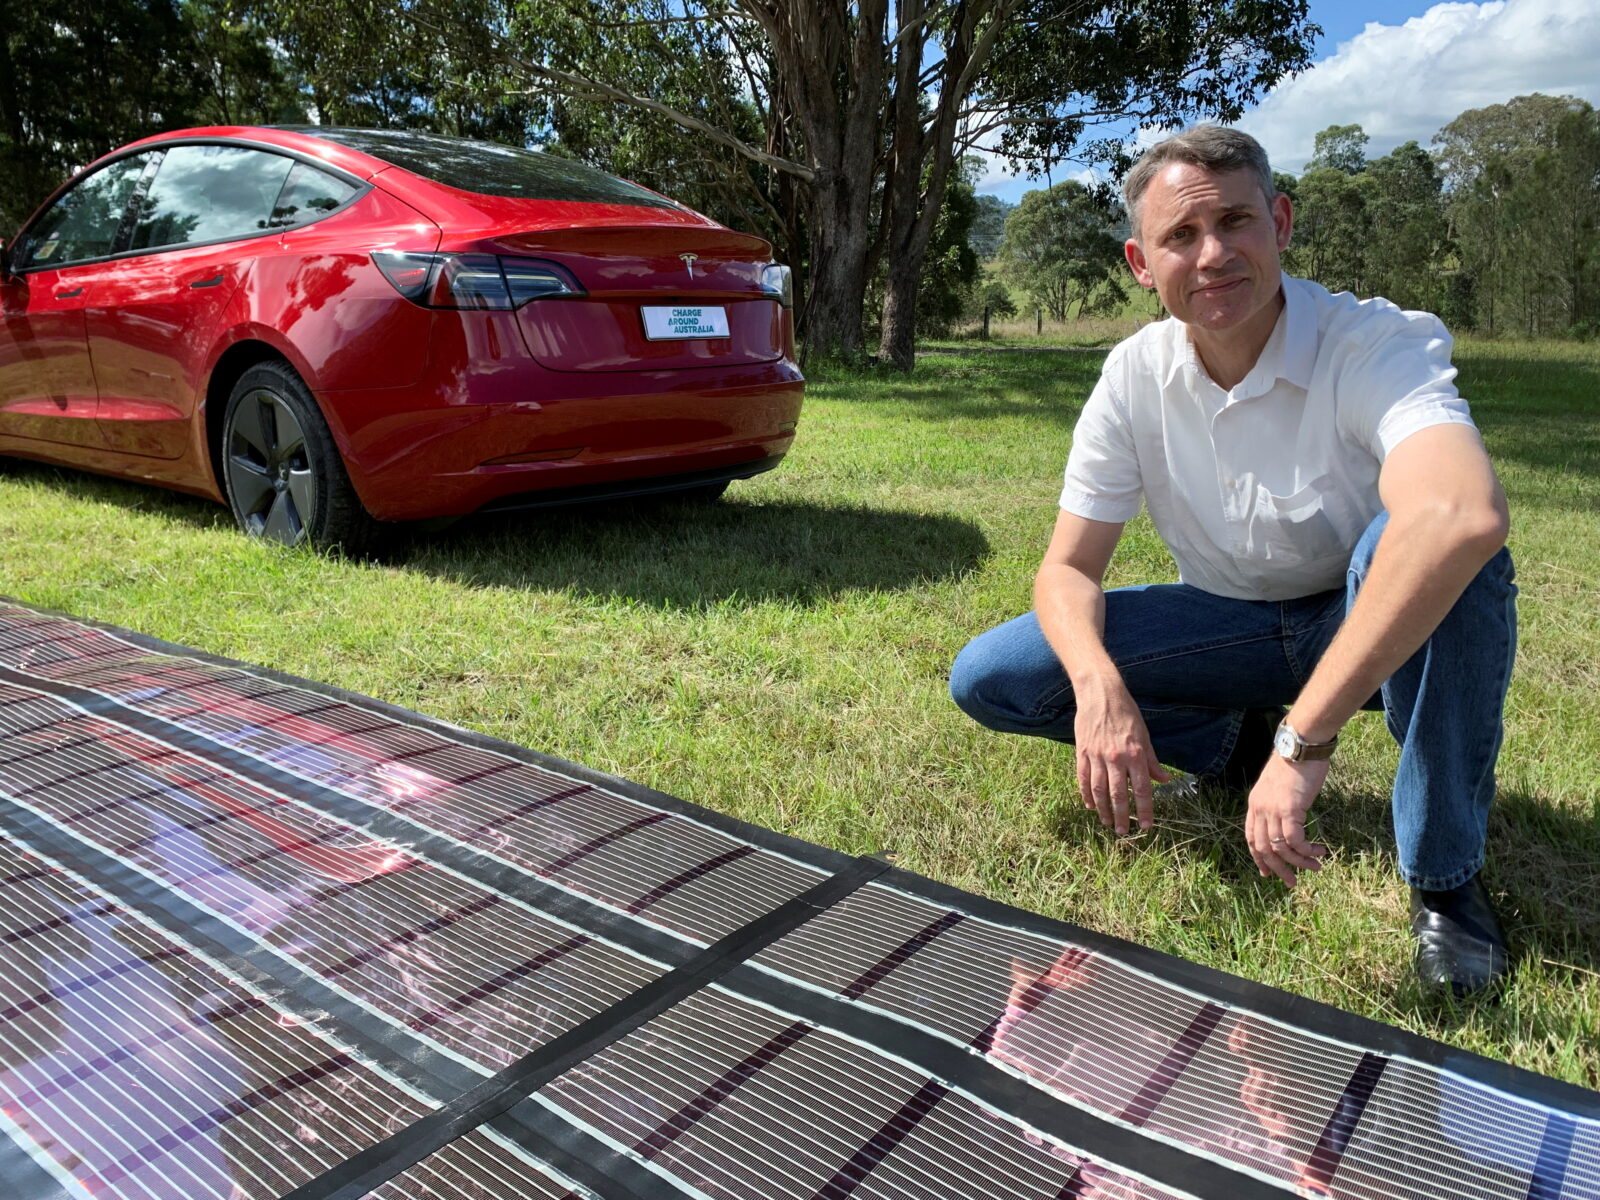 Charge Around Australia project lead and inventor of 'printed solar' panels Paul Dastoor next to a printed solar panel and a Tesla car, in Gosforth